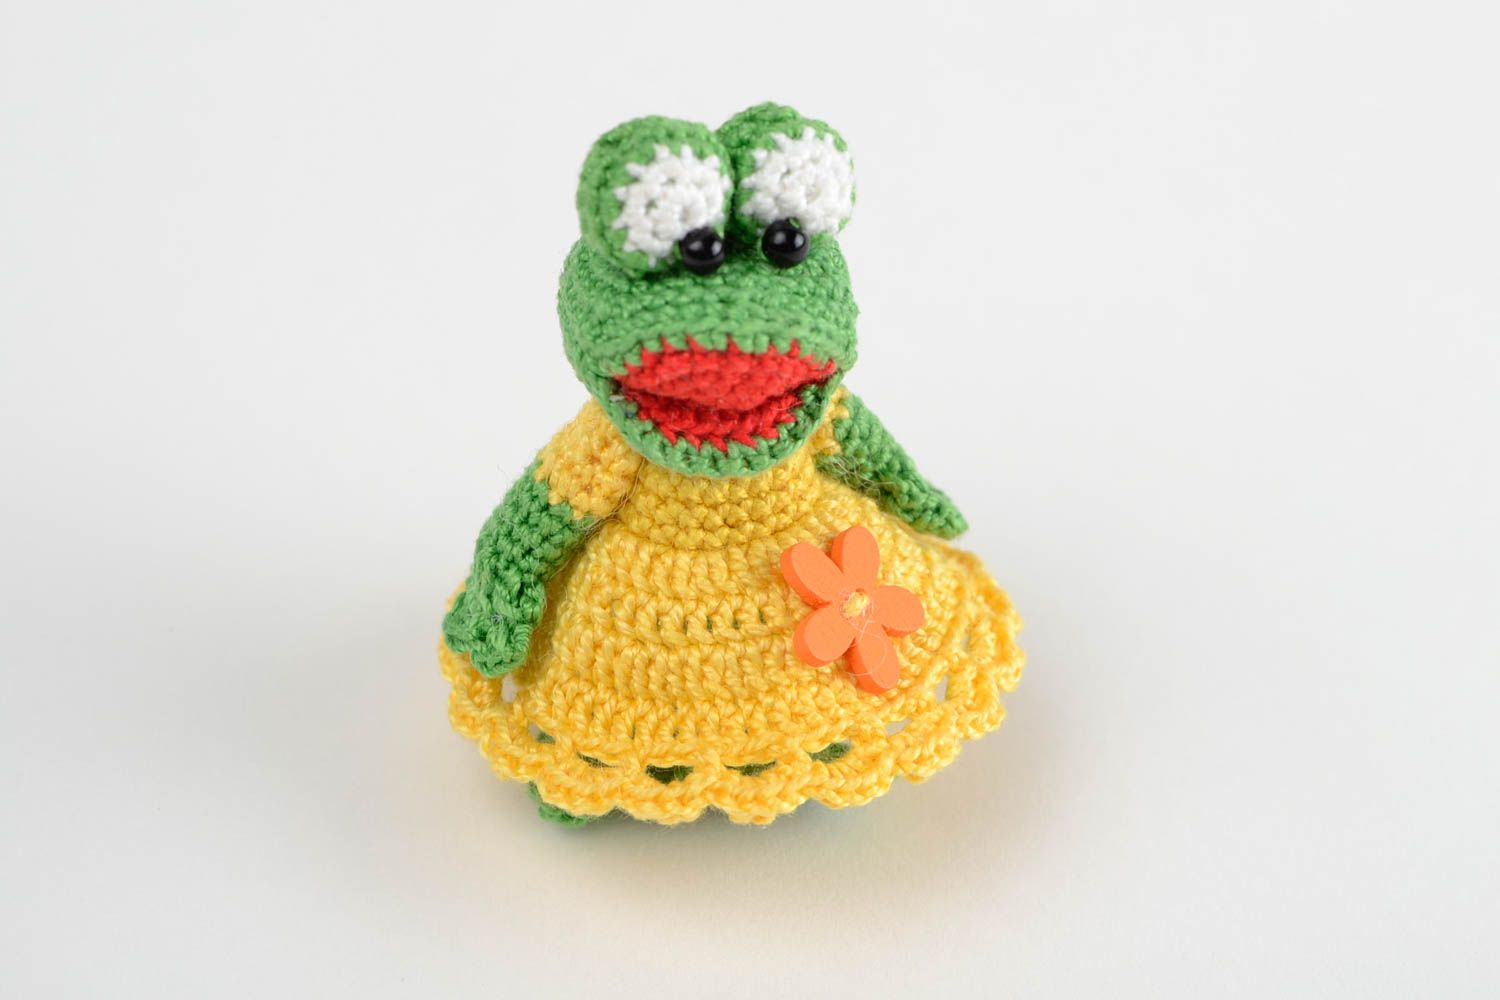 Handmade toy crocheted toys for children gift ideas unusual soft toys photo 4